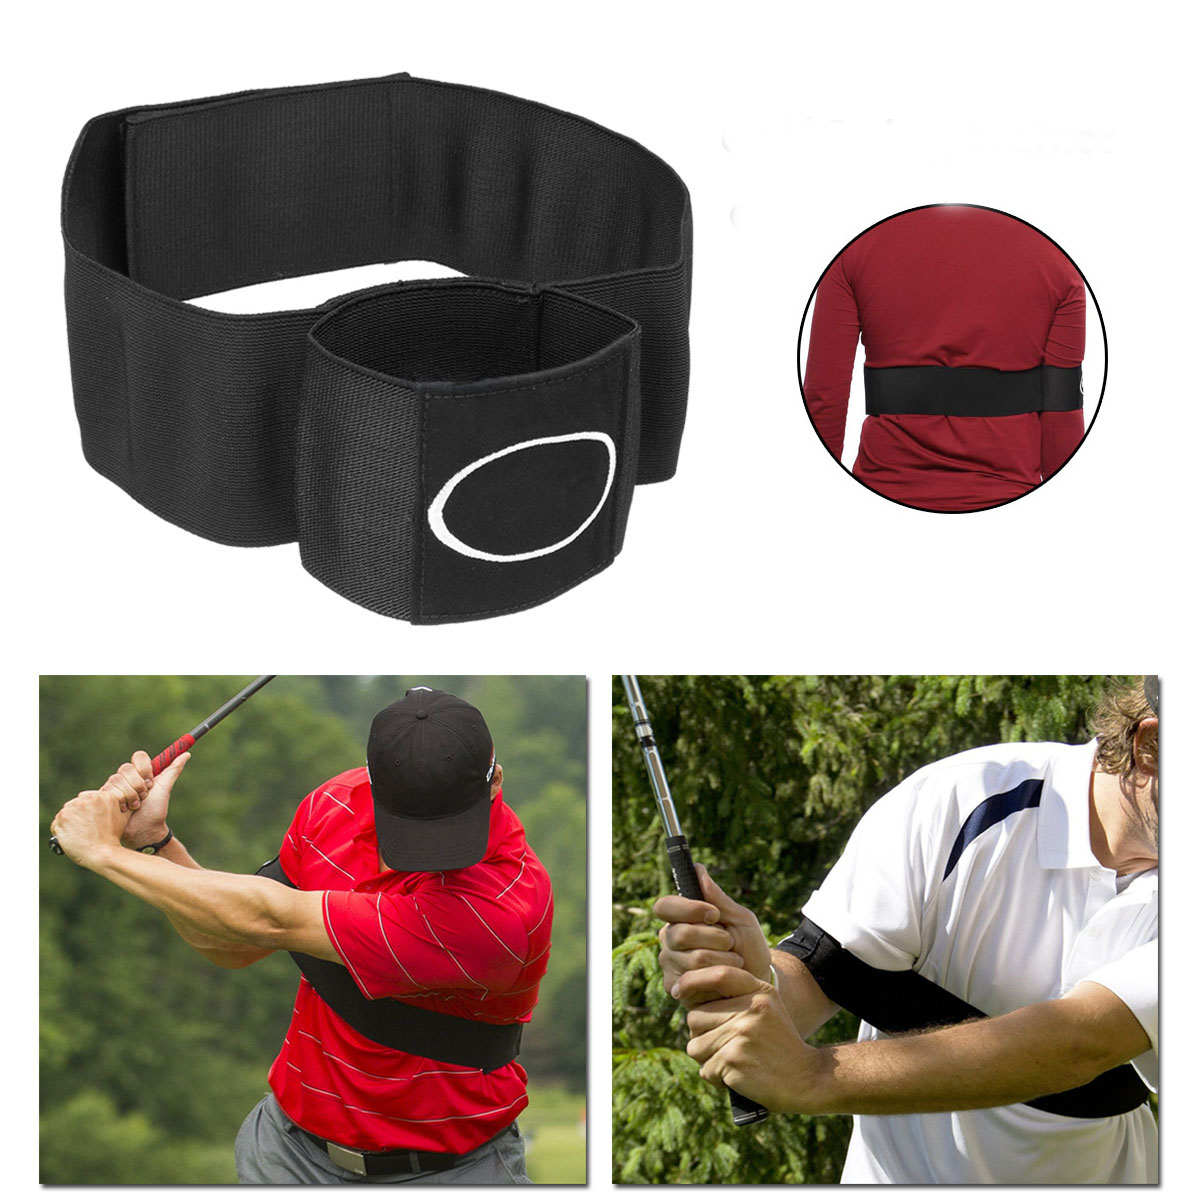 

Golf Connect Easy Swing Trainer Sports Training Practice Aid Ball Strike Posture Corrector Strap